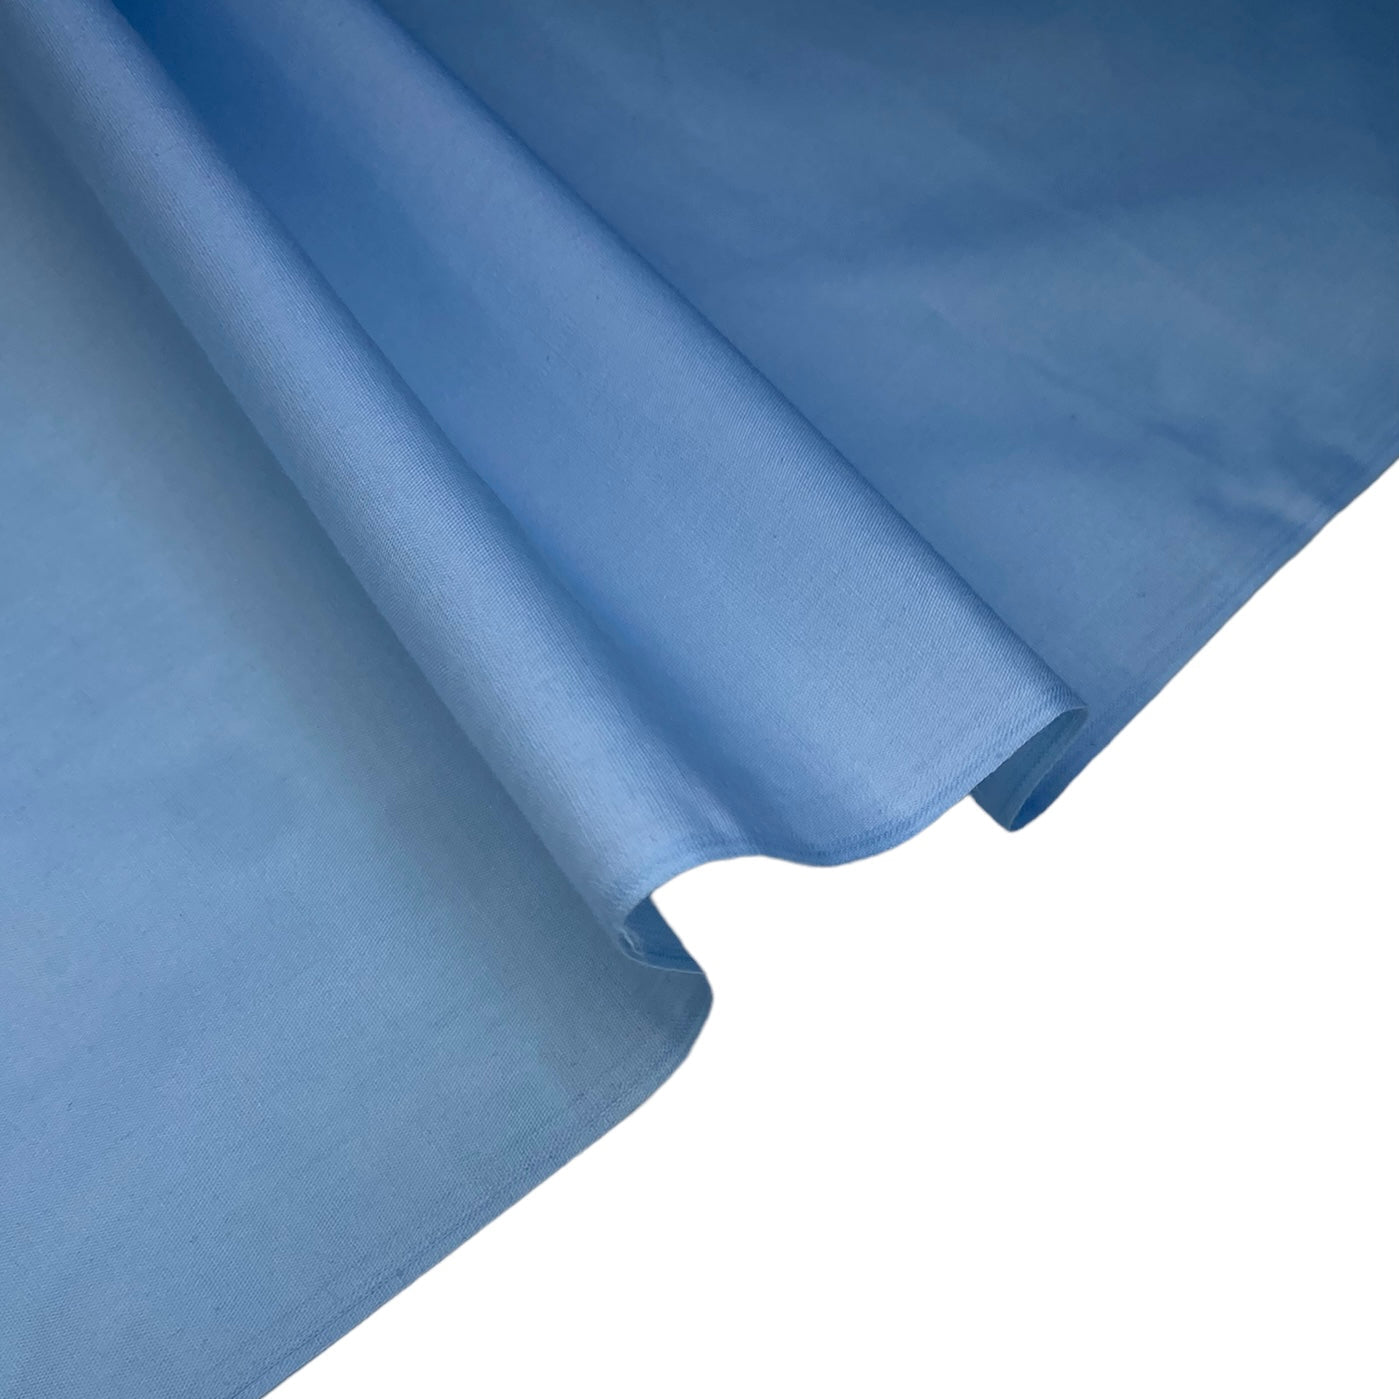 Poly/Cotton Broadcloth - 44” - Light Blue